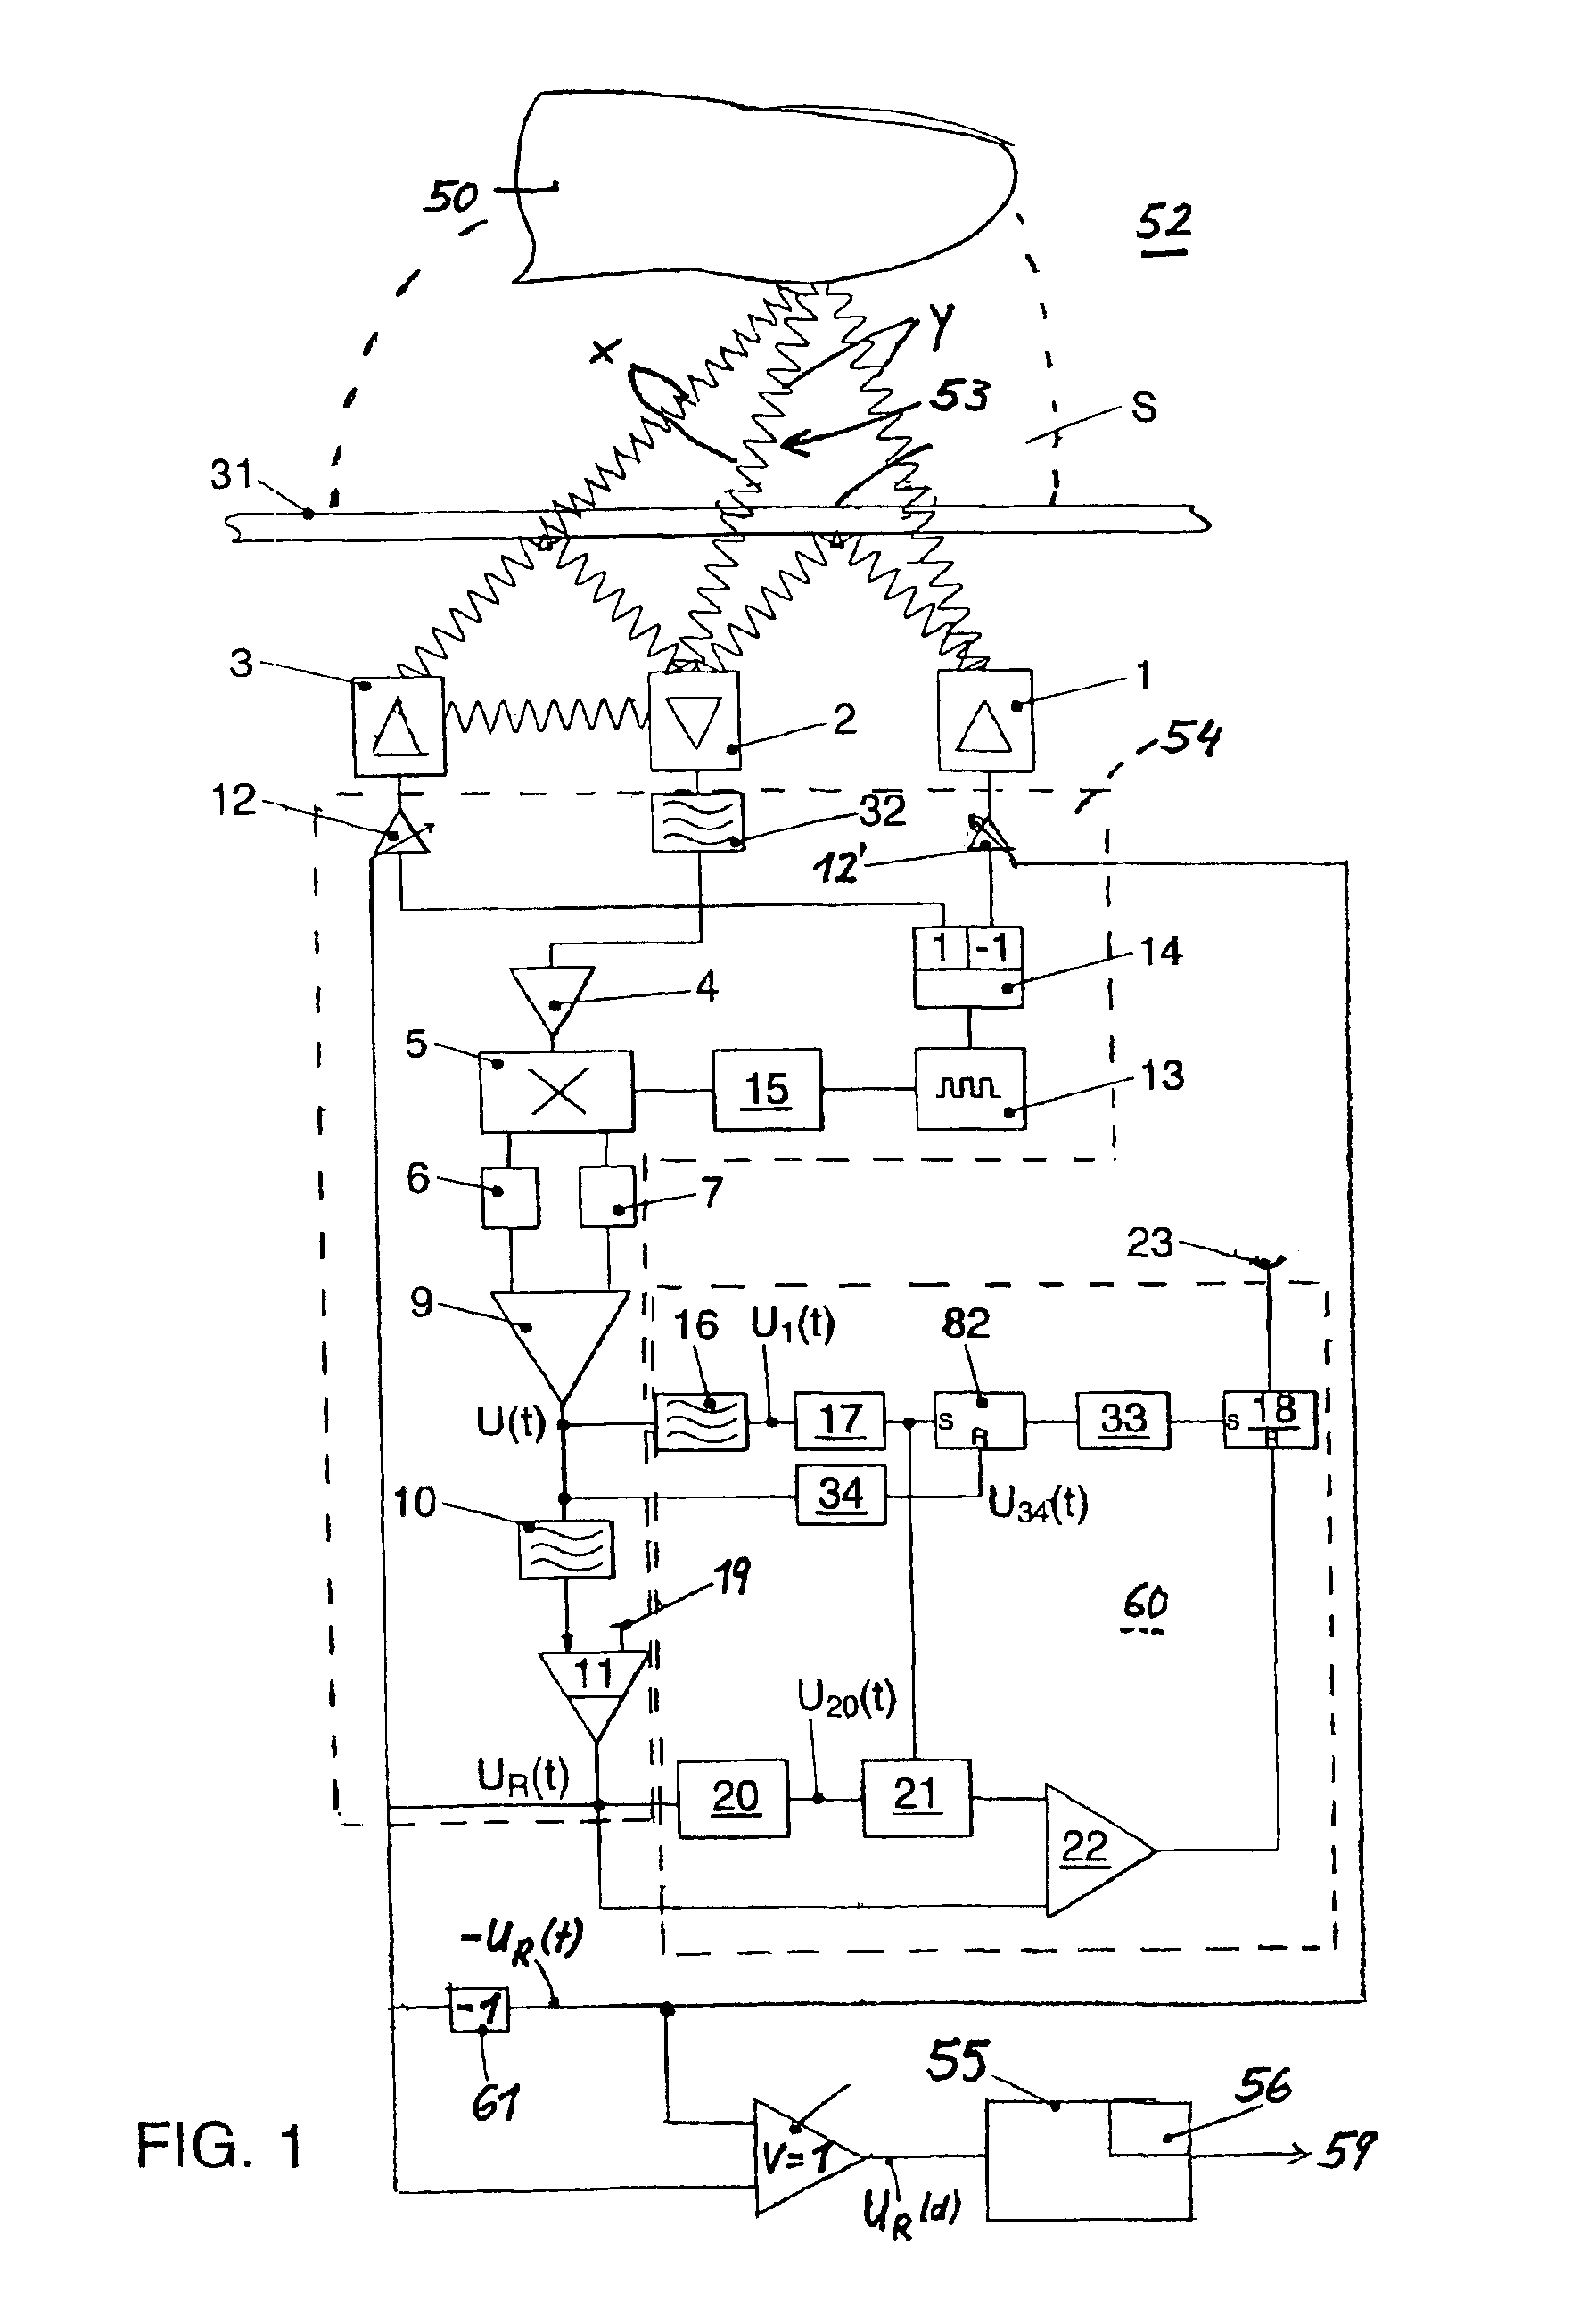 Method and devices for opto-electronically determining the position of an object